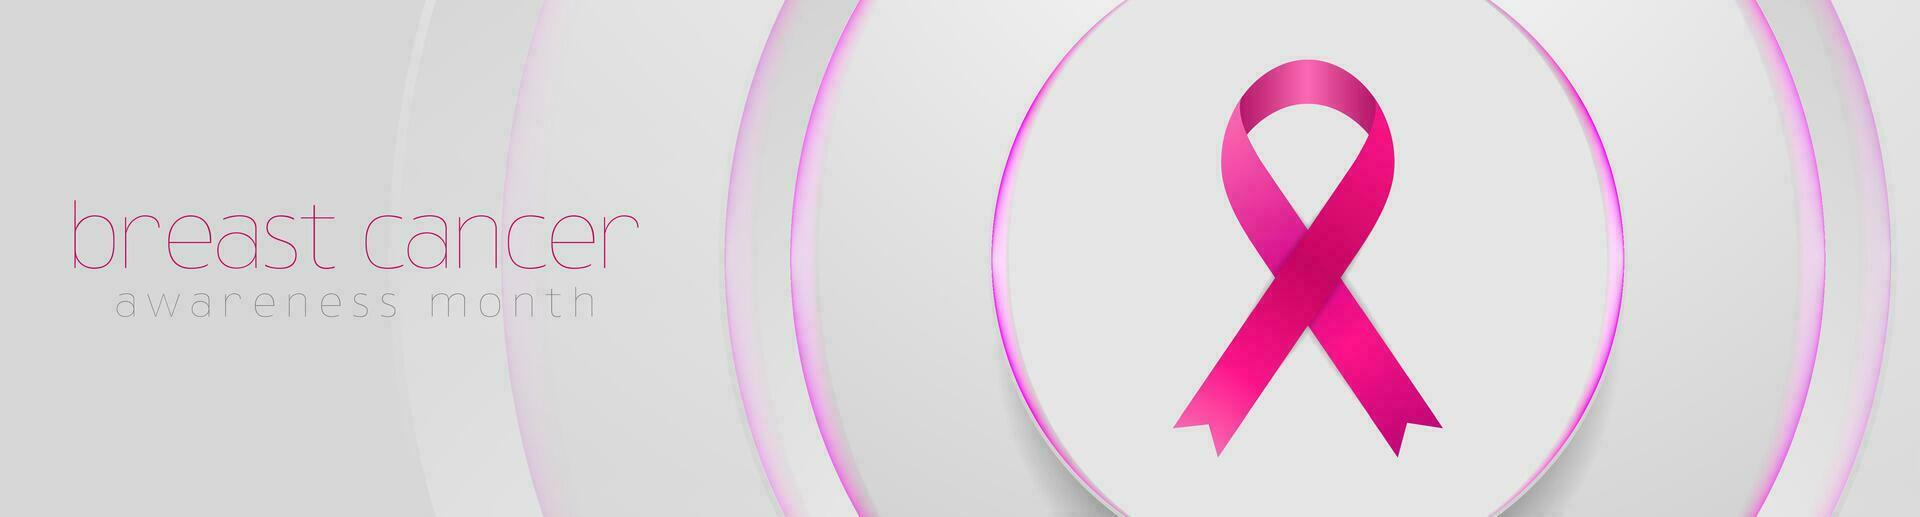 Breast cancer awareness month. Neon circles background and pink ribbon tape vector